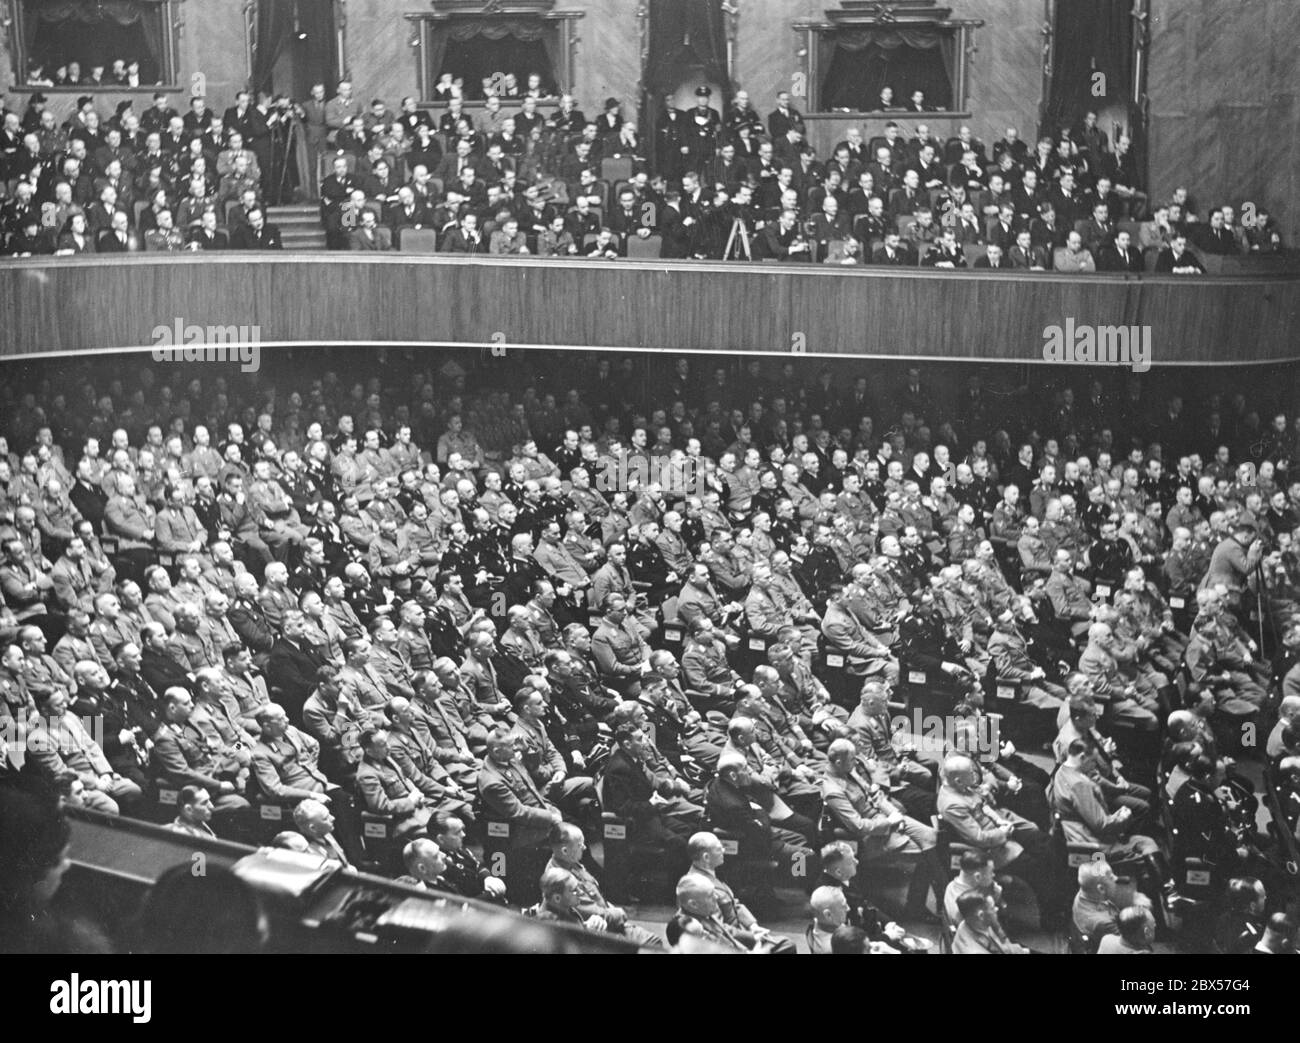 View of NSDAP members in the parliament during Hitler's speech. Stock Photo